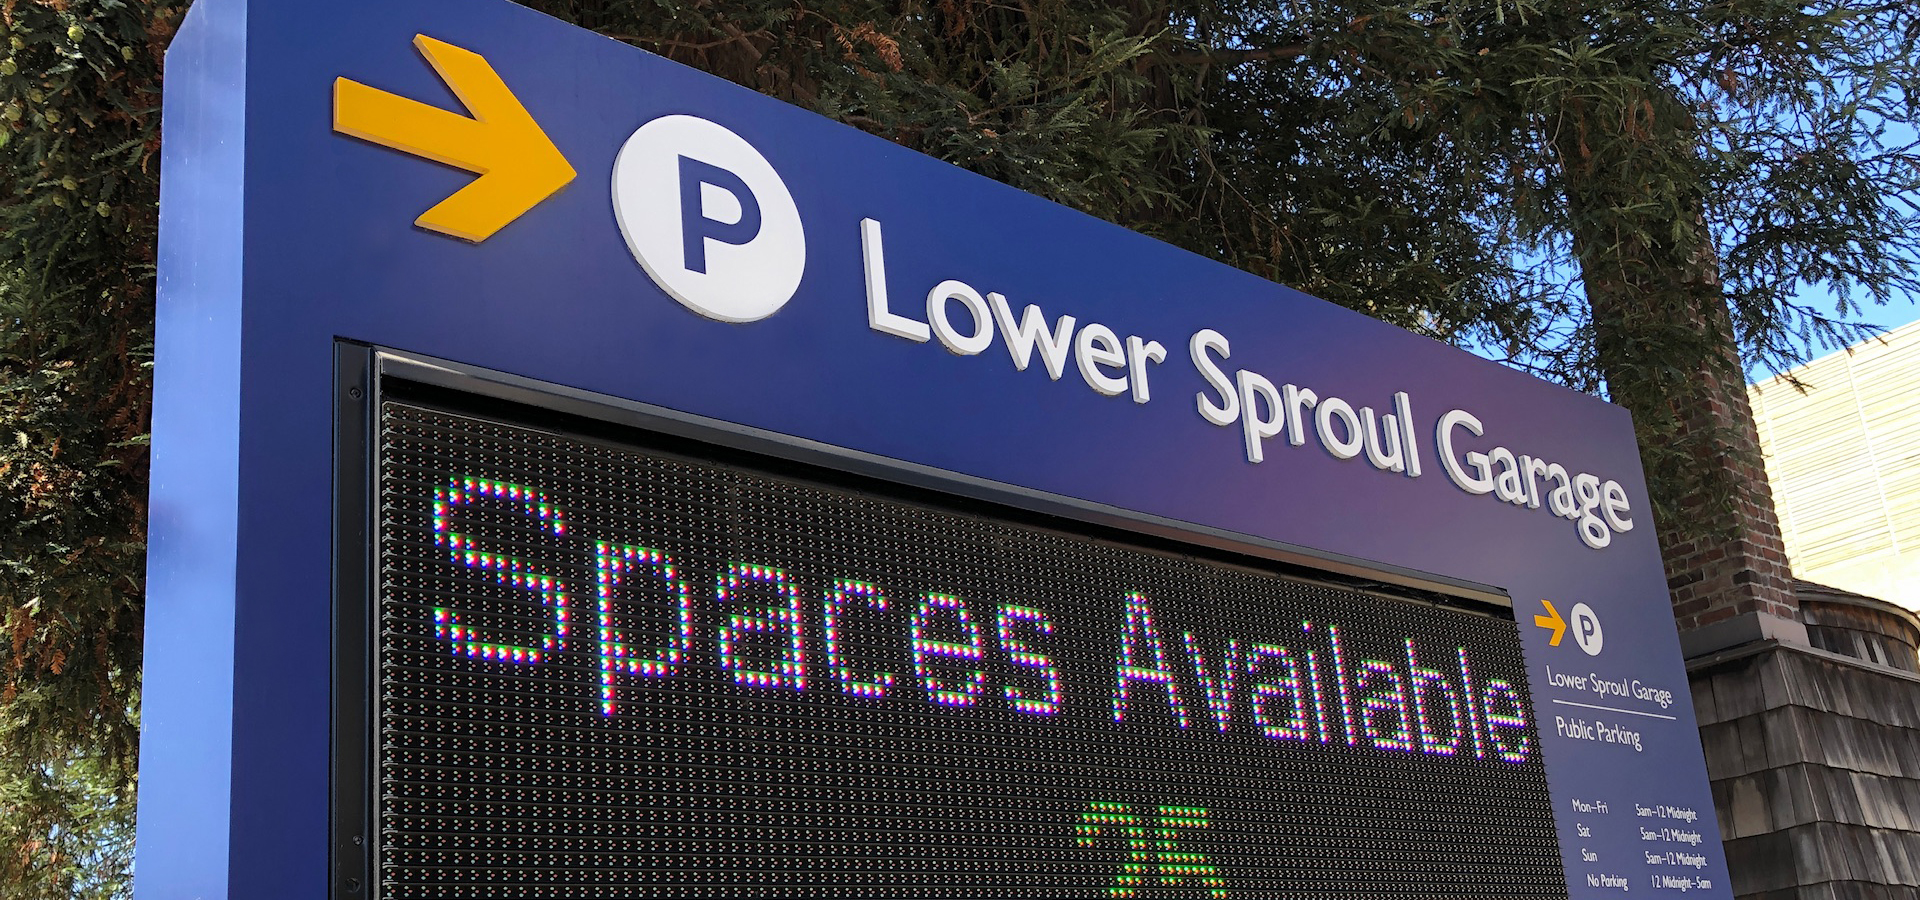 The parking lot designation sign for Zellerbach's Lower Sproul Garage, the digital sign displaying a message saying 25 parking spaces are available.